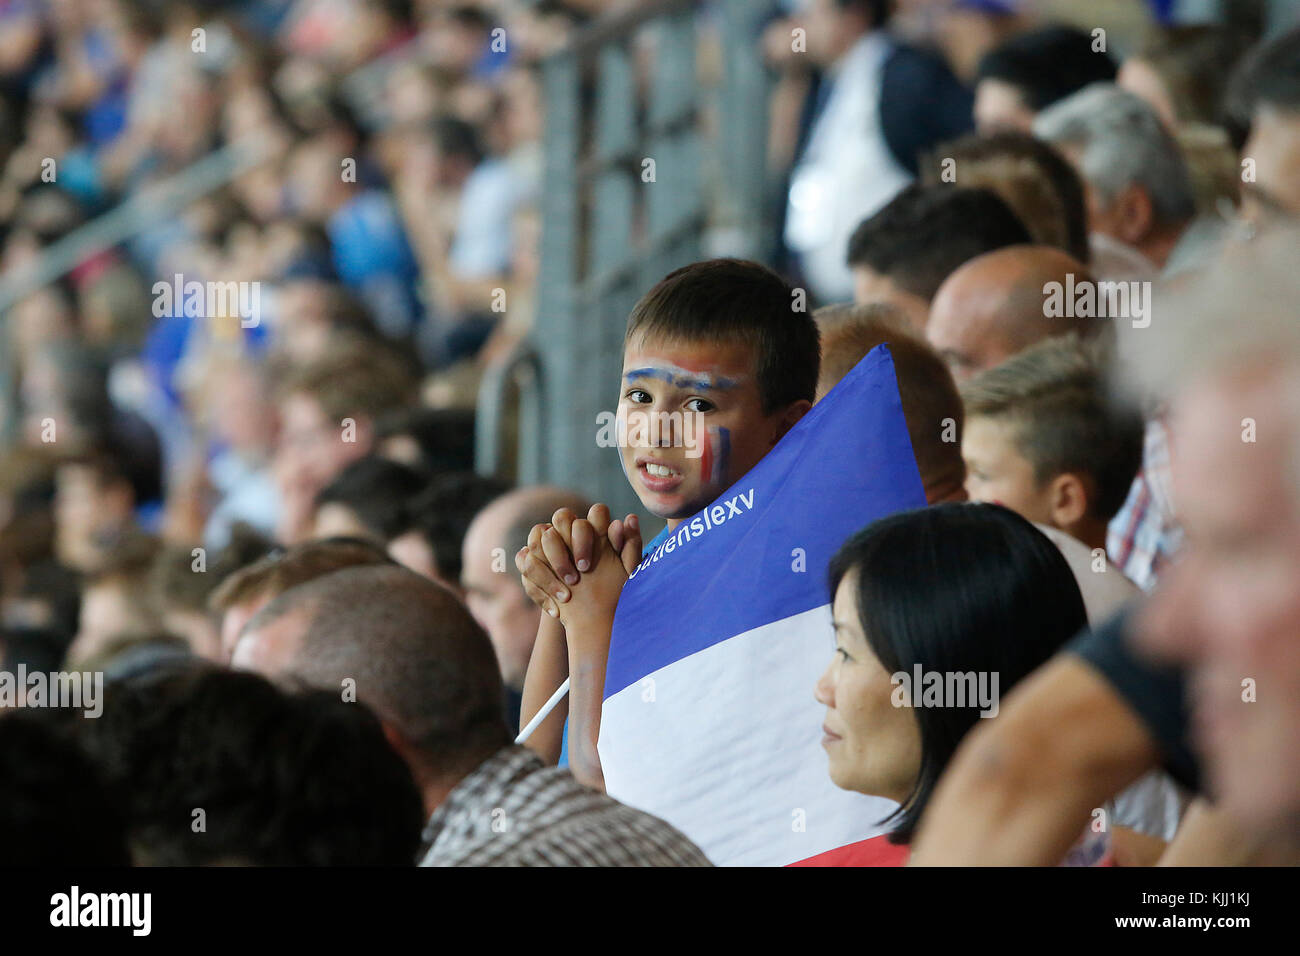 Rugby match at the Stade de France. Spectators. France. Stock Photo